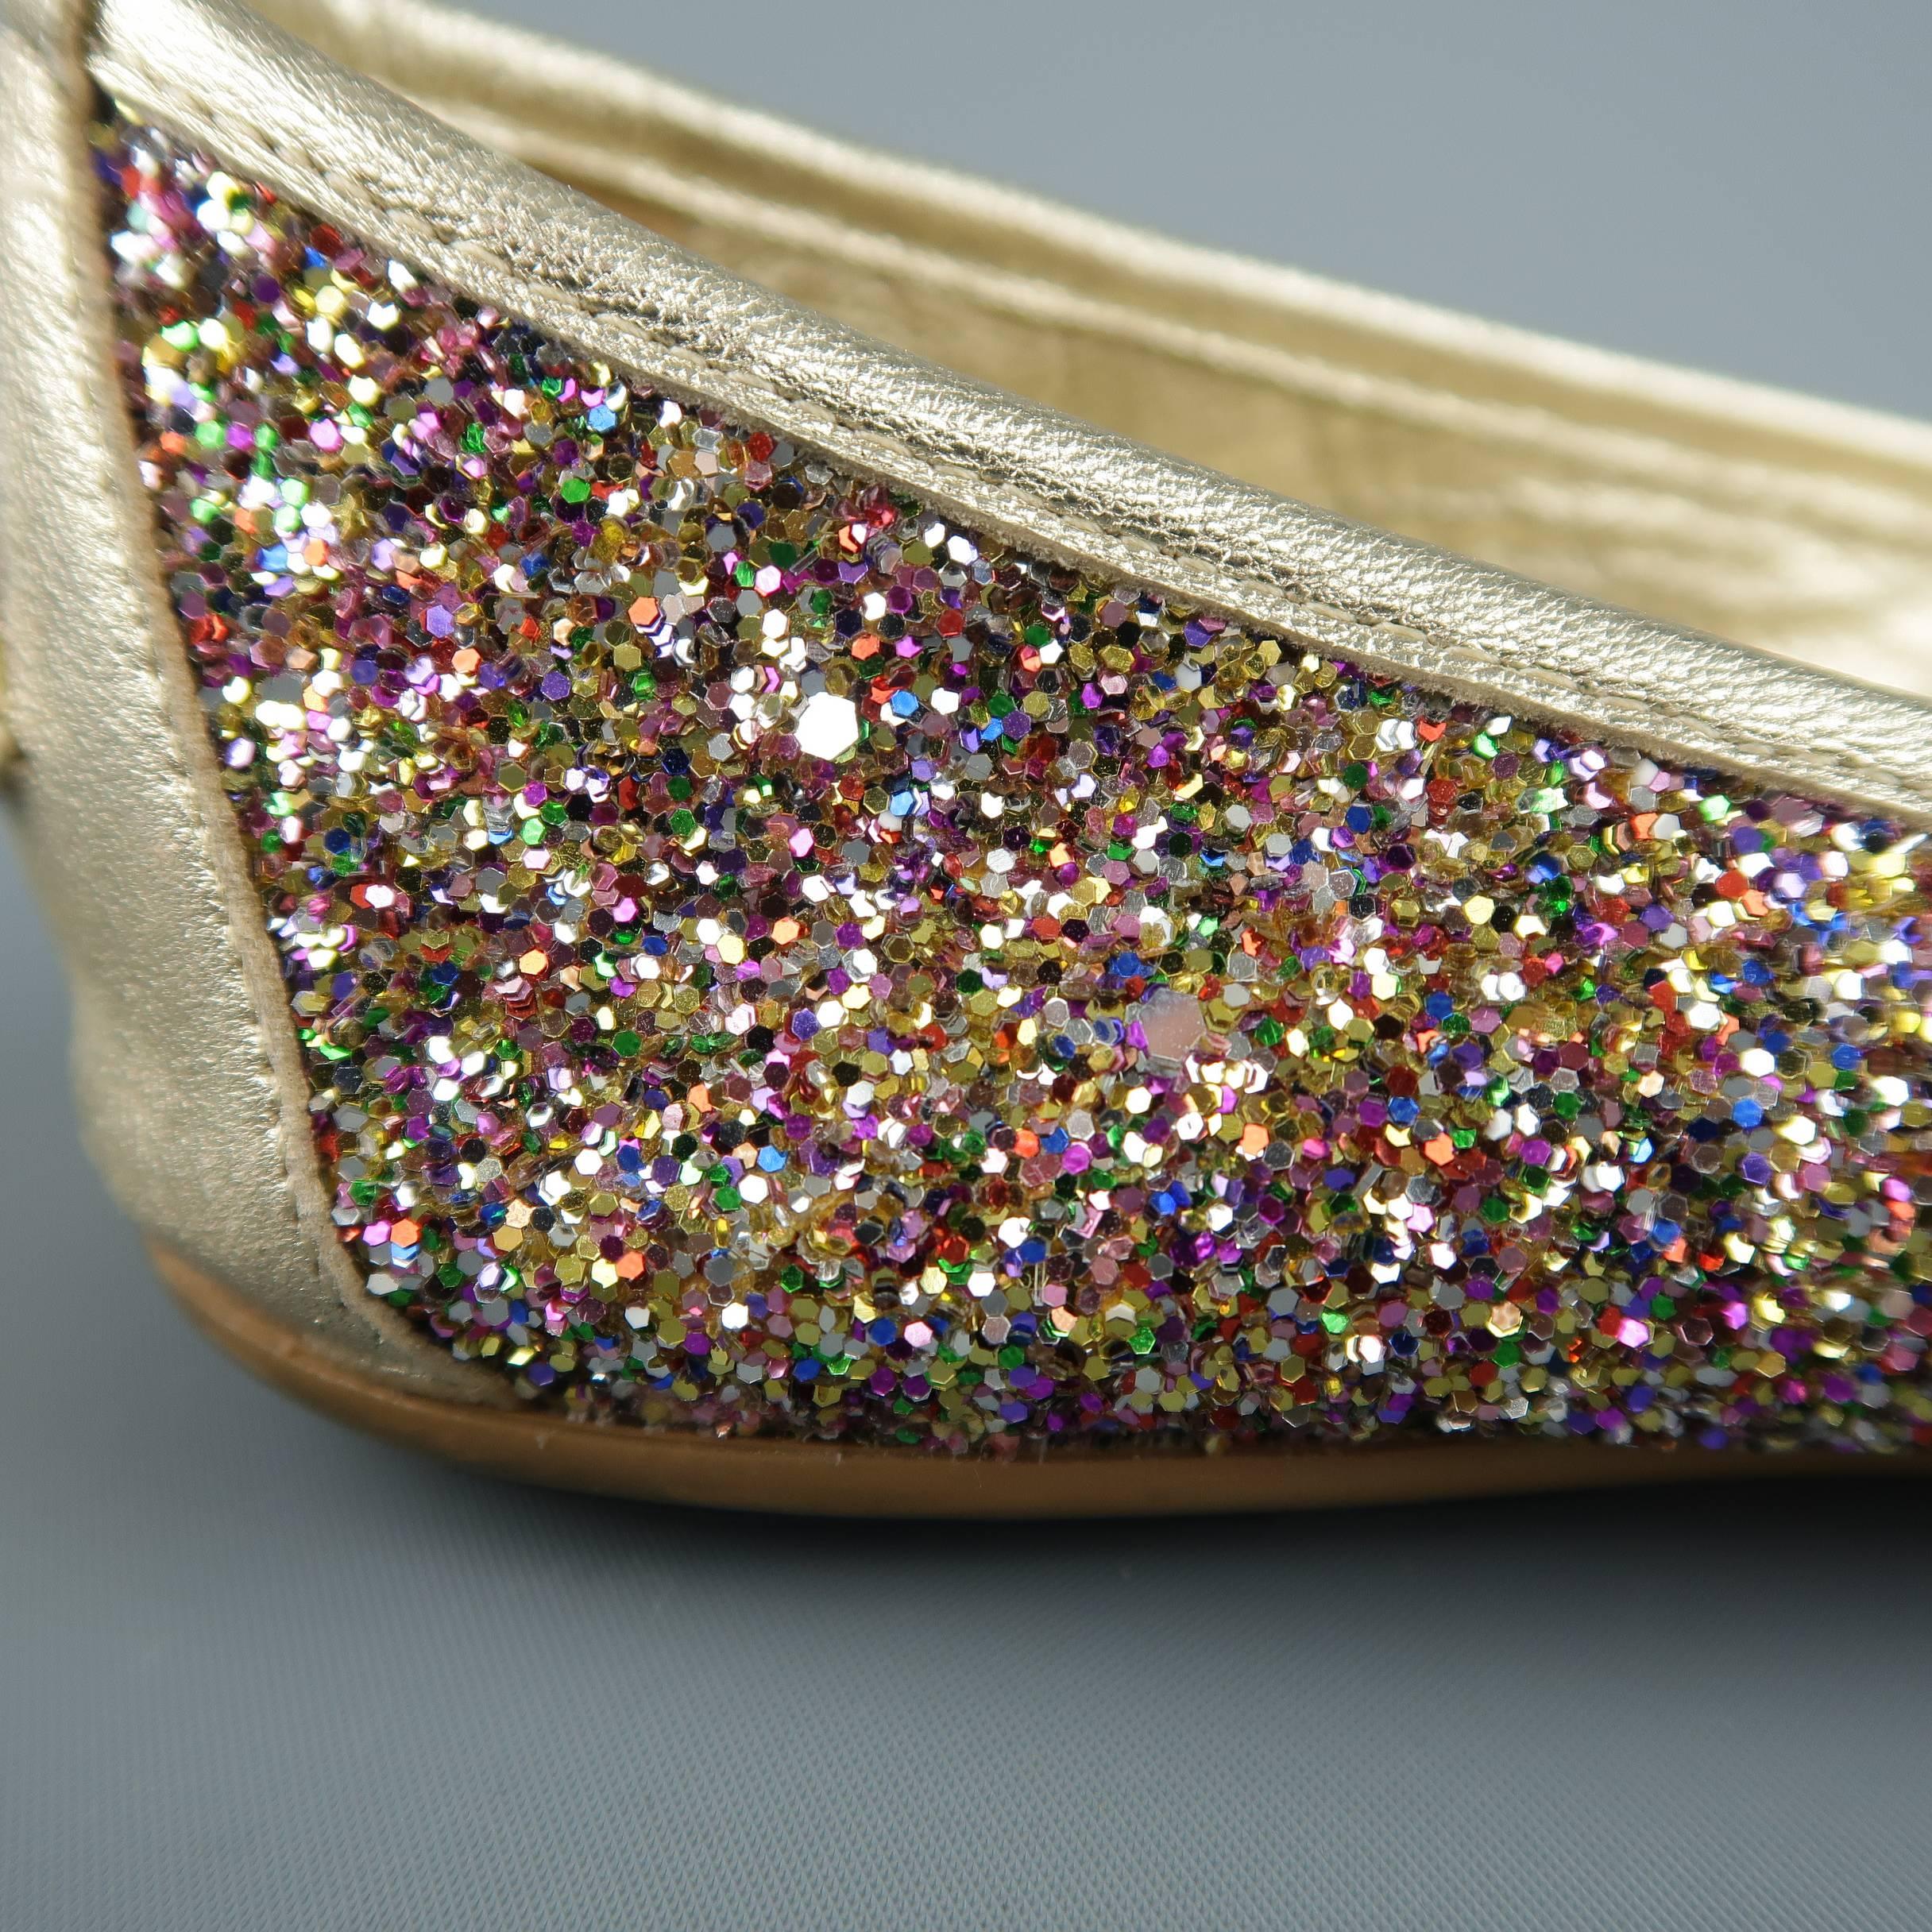 JIMMY CHOO Size 8 Gold Leather Multi Color Glitter Ballet Flats 1